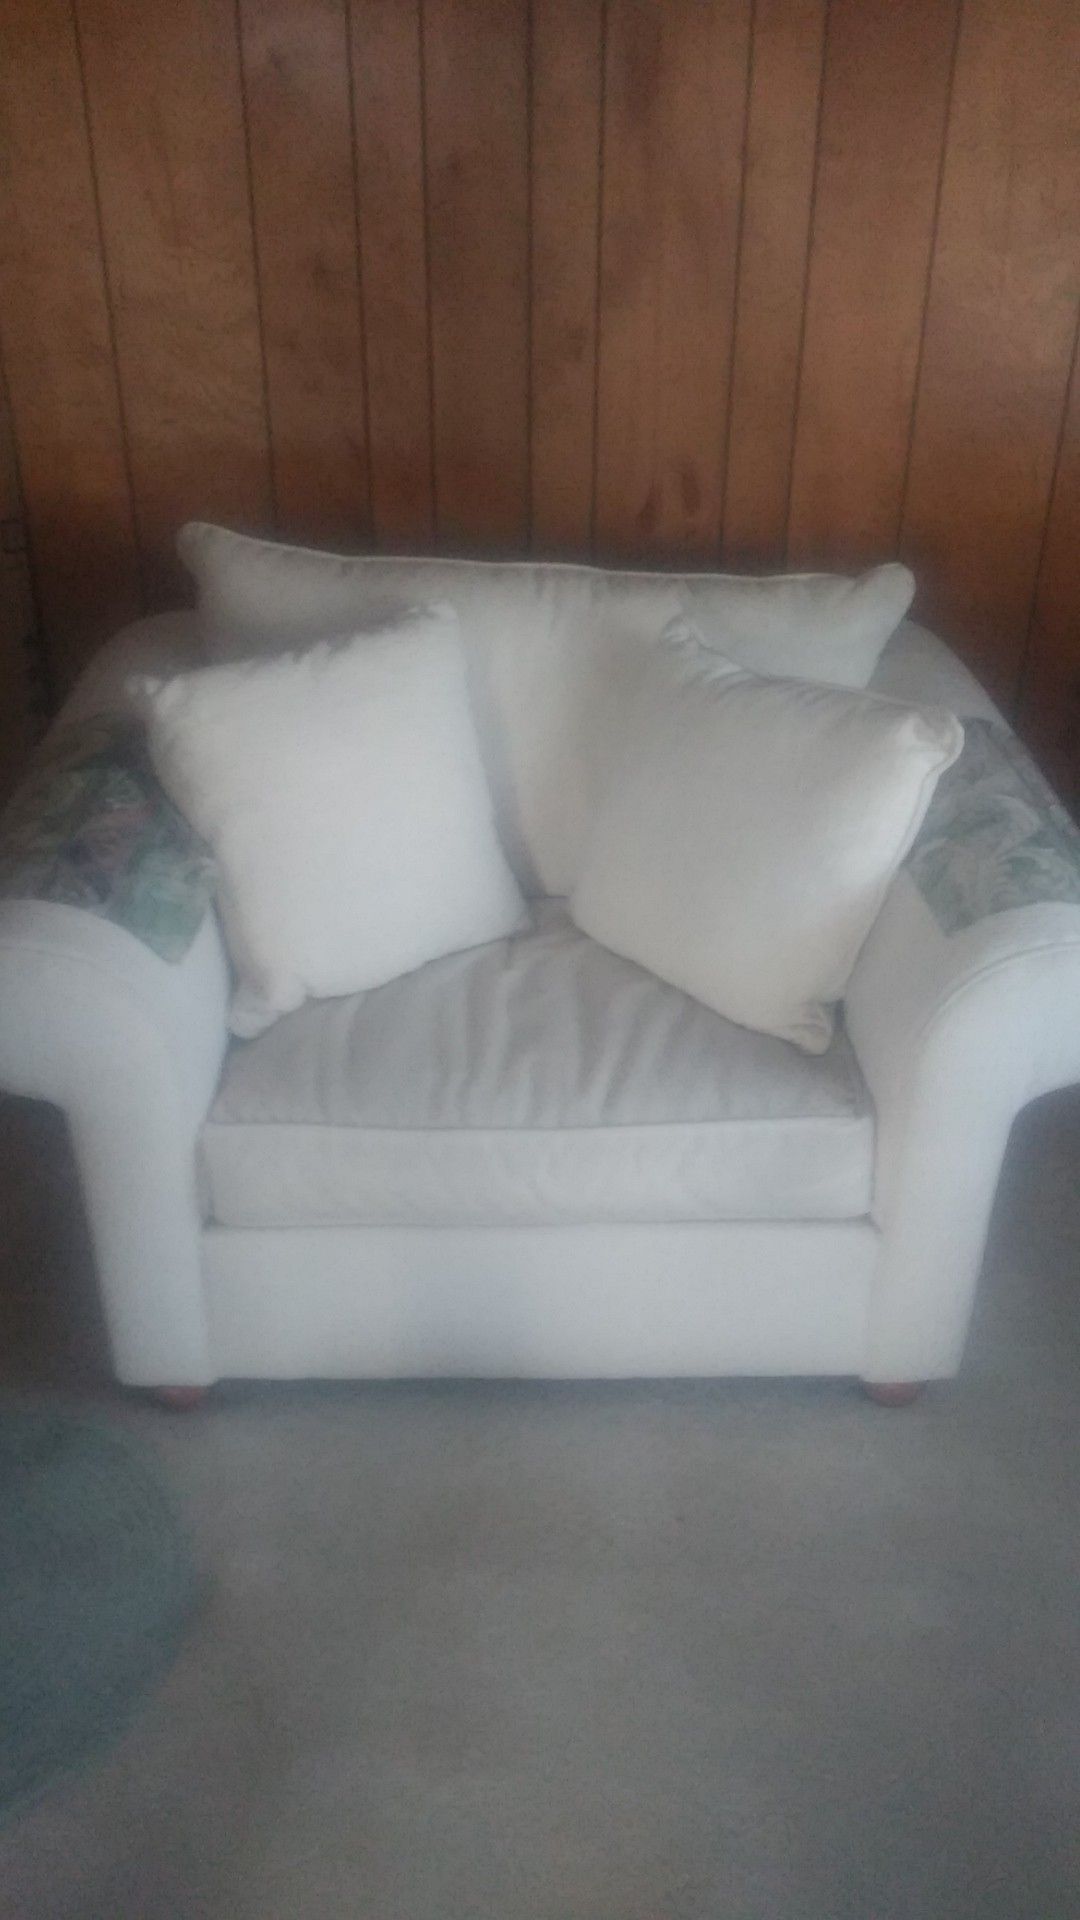 Big comfy chair with pillows